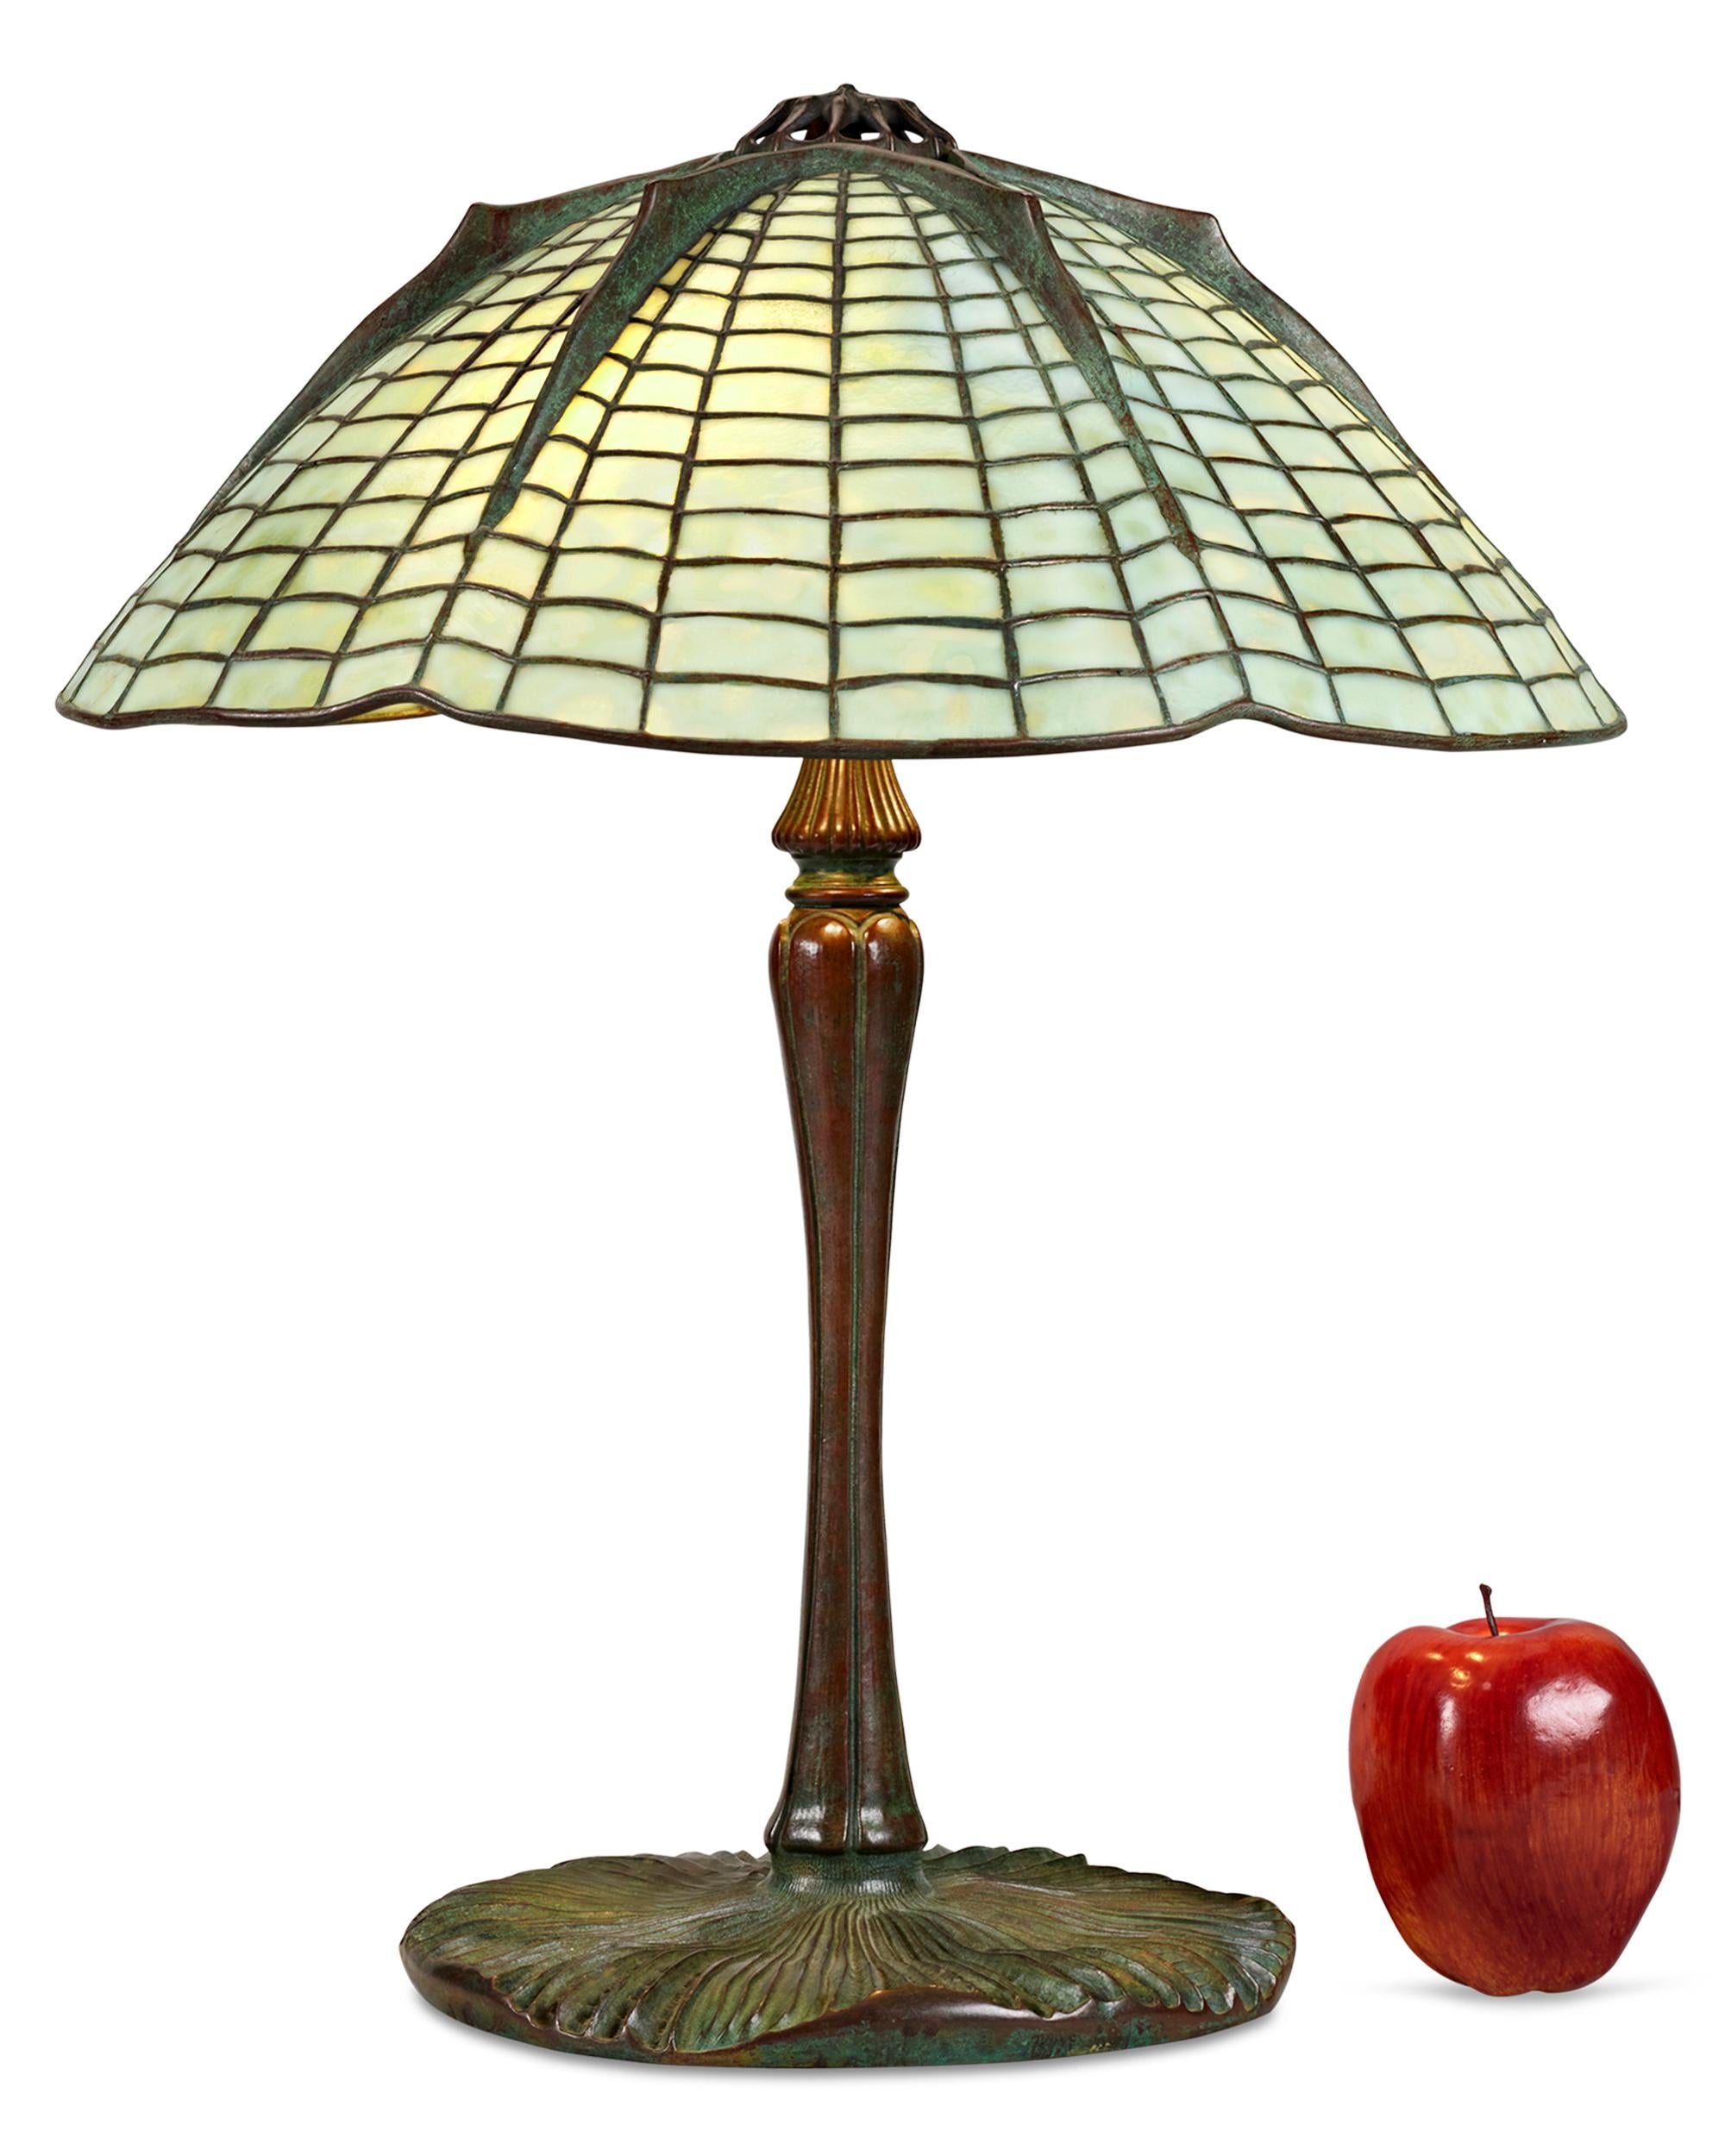 Tiffany Studios Spider Lamp In Excellent Condition For Sale In New Orleans, LA